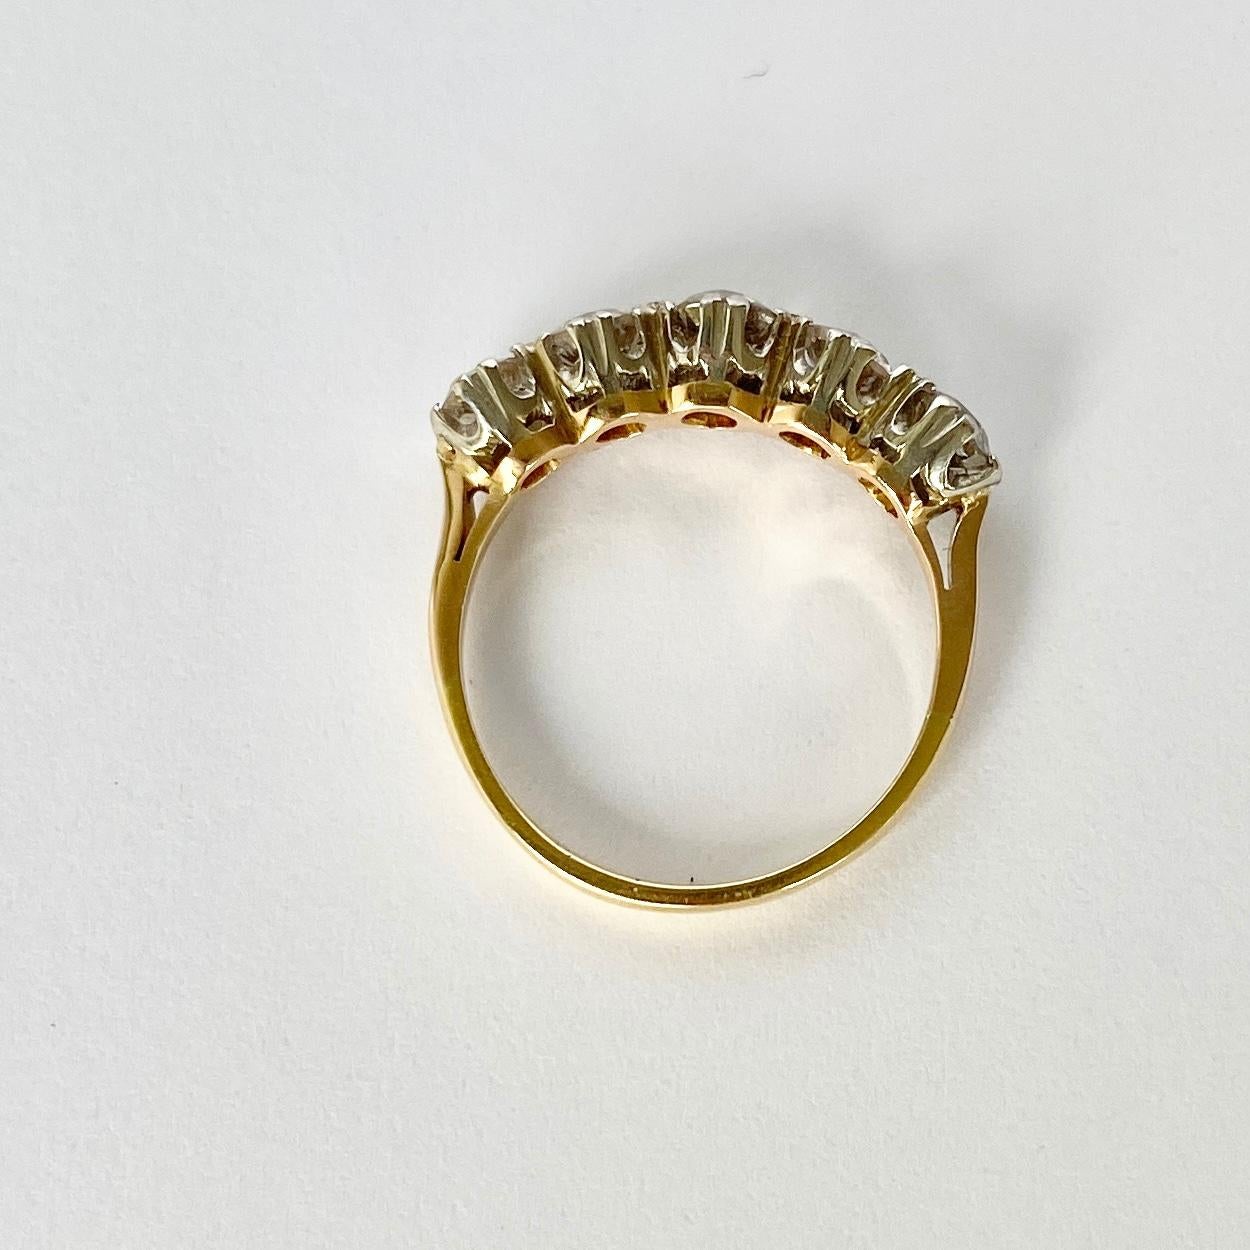 Five glistening diamonds sit fabulously on top of a simple open work setting modelled in 18ct gold. The diamonds total 1ct and are highly included. The diamonds are still bright and have fabulous sparkle. 

Ring Size: J 1/2 or 5 
Width: 5.5mm
Height